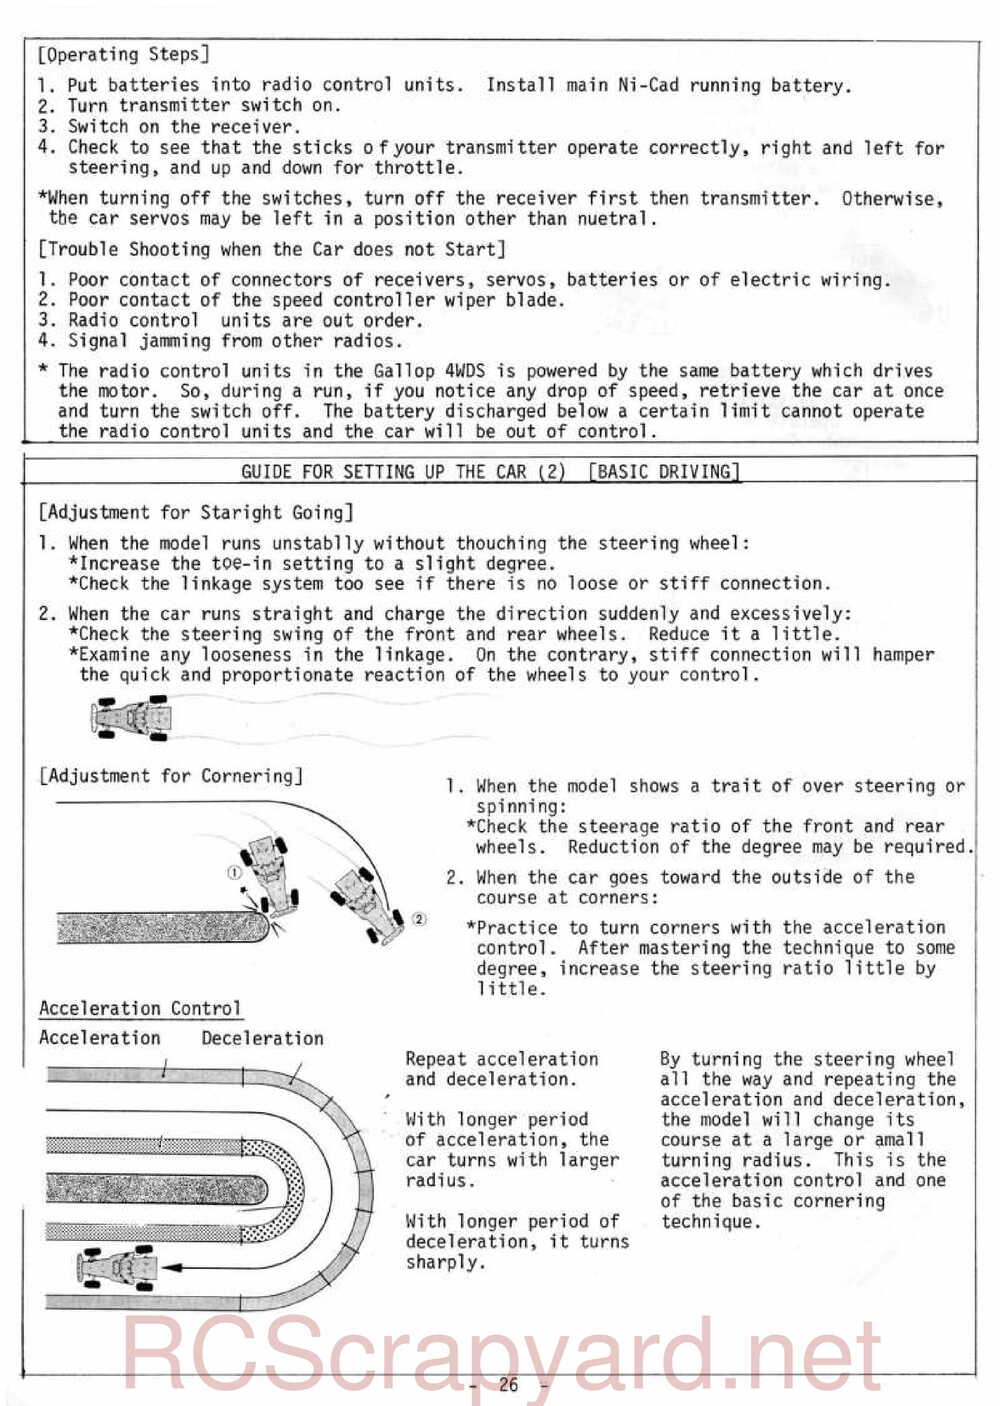 Kyosho - 3069 - Gallop MkII - Manual - Page 26